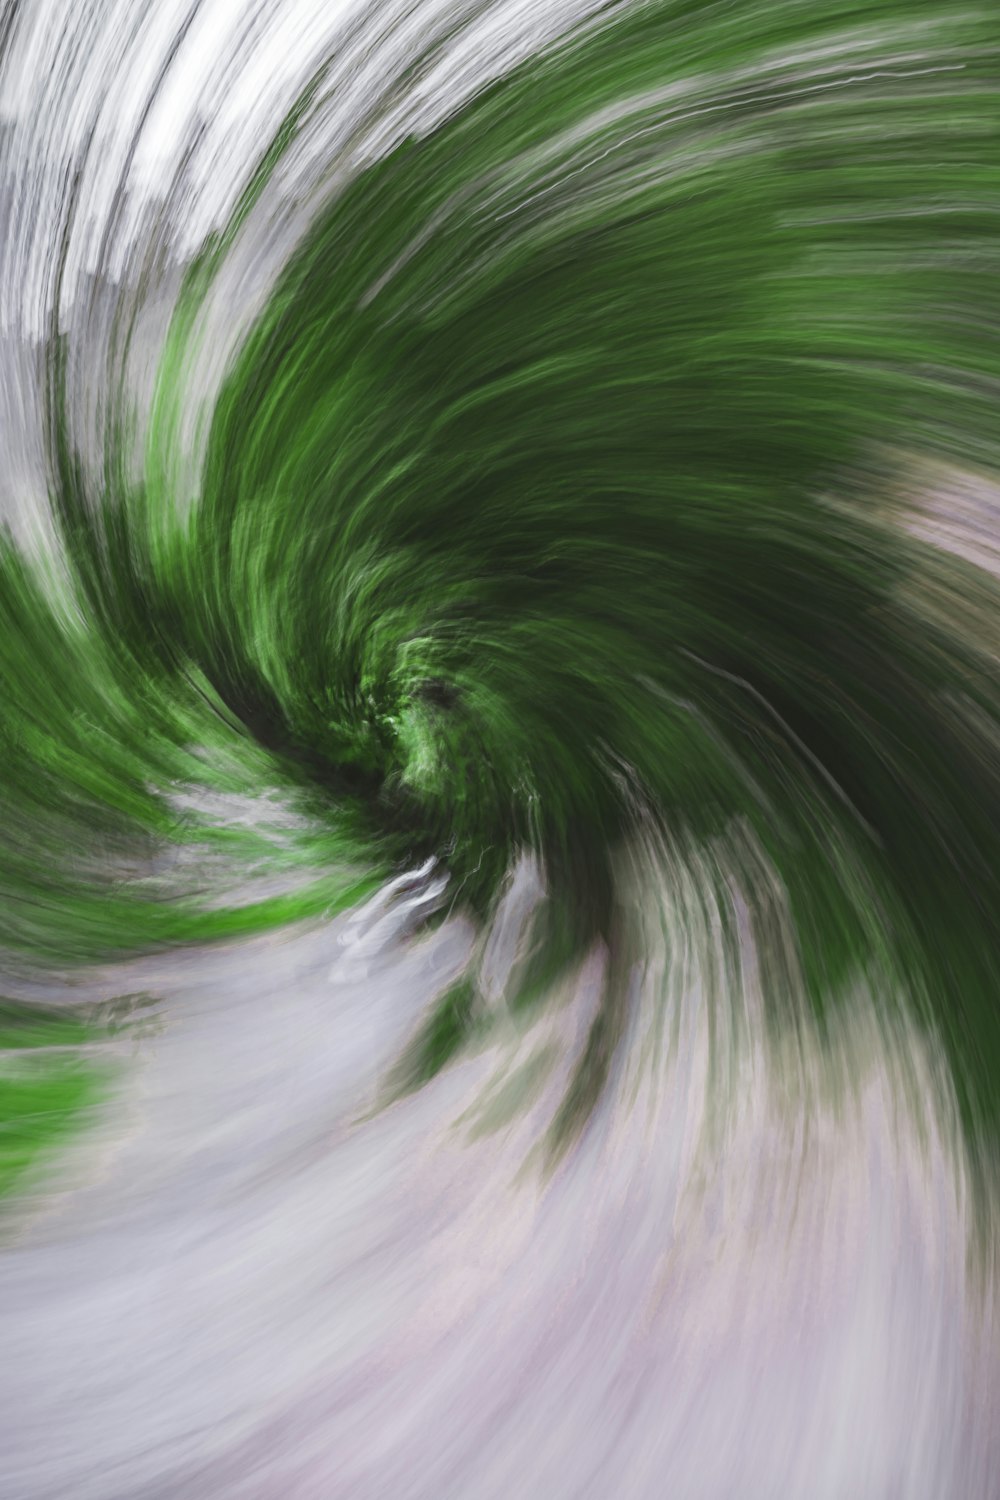 a picture of a green and white swirl